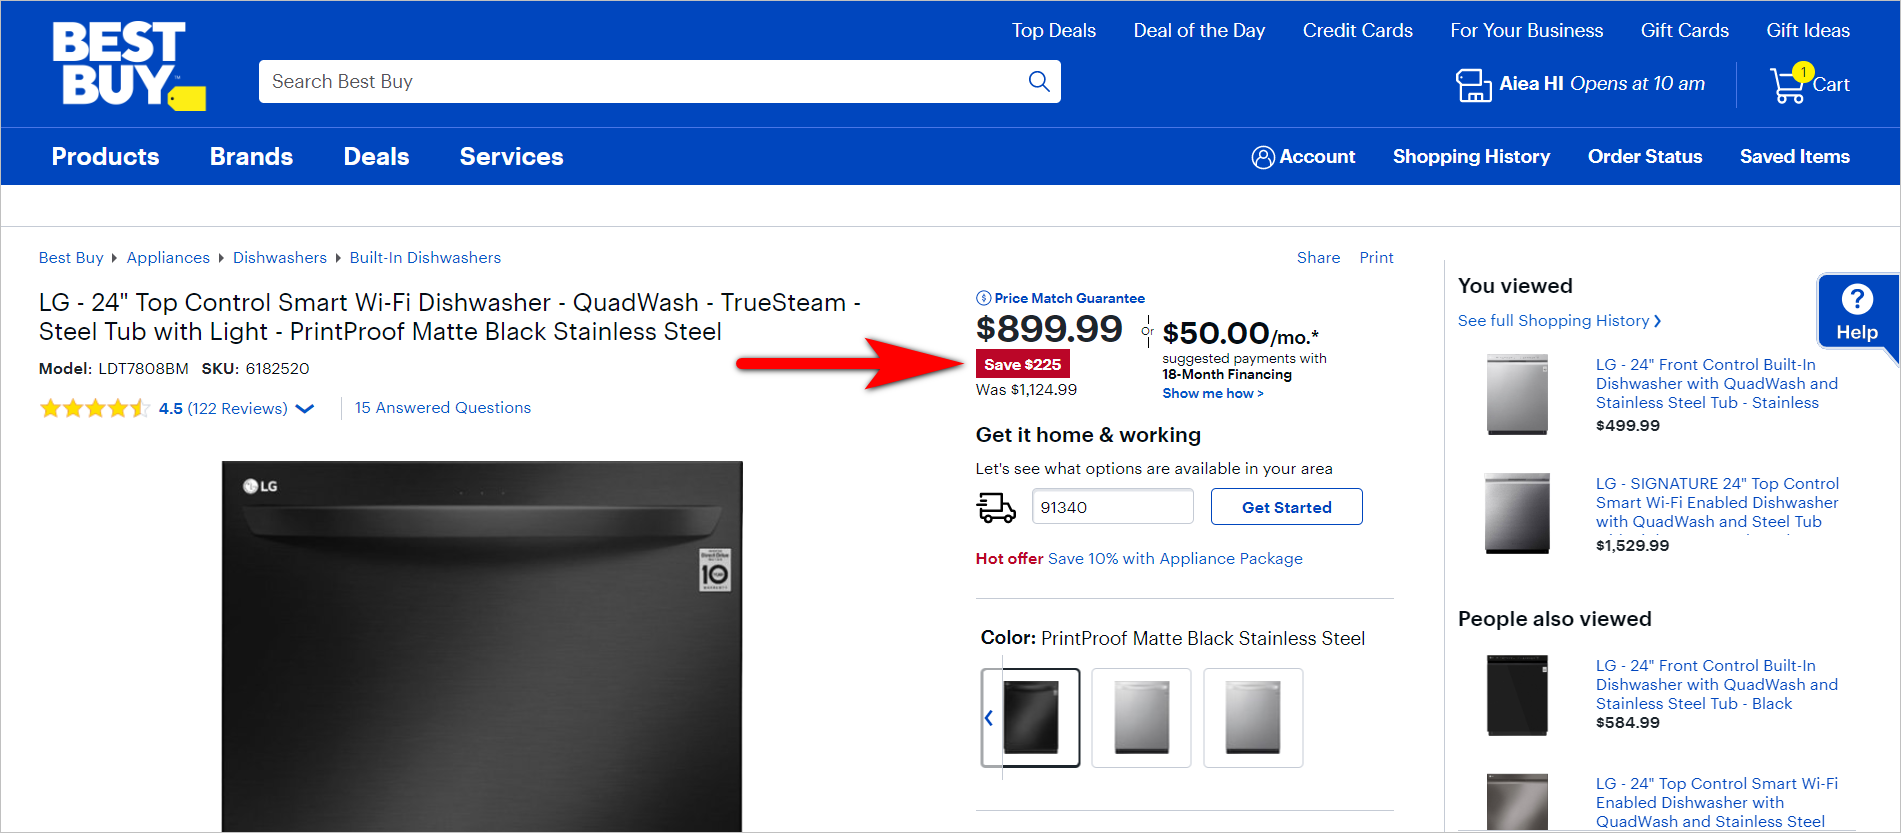 the rule of 100 - big ticket item example: bestbuy.com product detail page for LG 24" top control smart wifi dishwasher with a regular price of $1,124.99 and a sale price of $899.99. the pdp shows that the customer saves $225